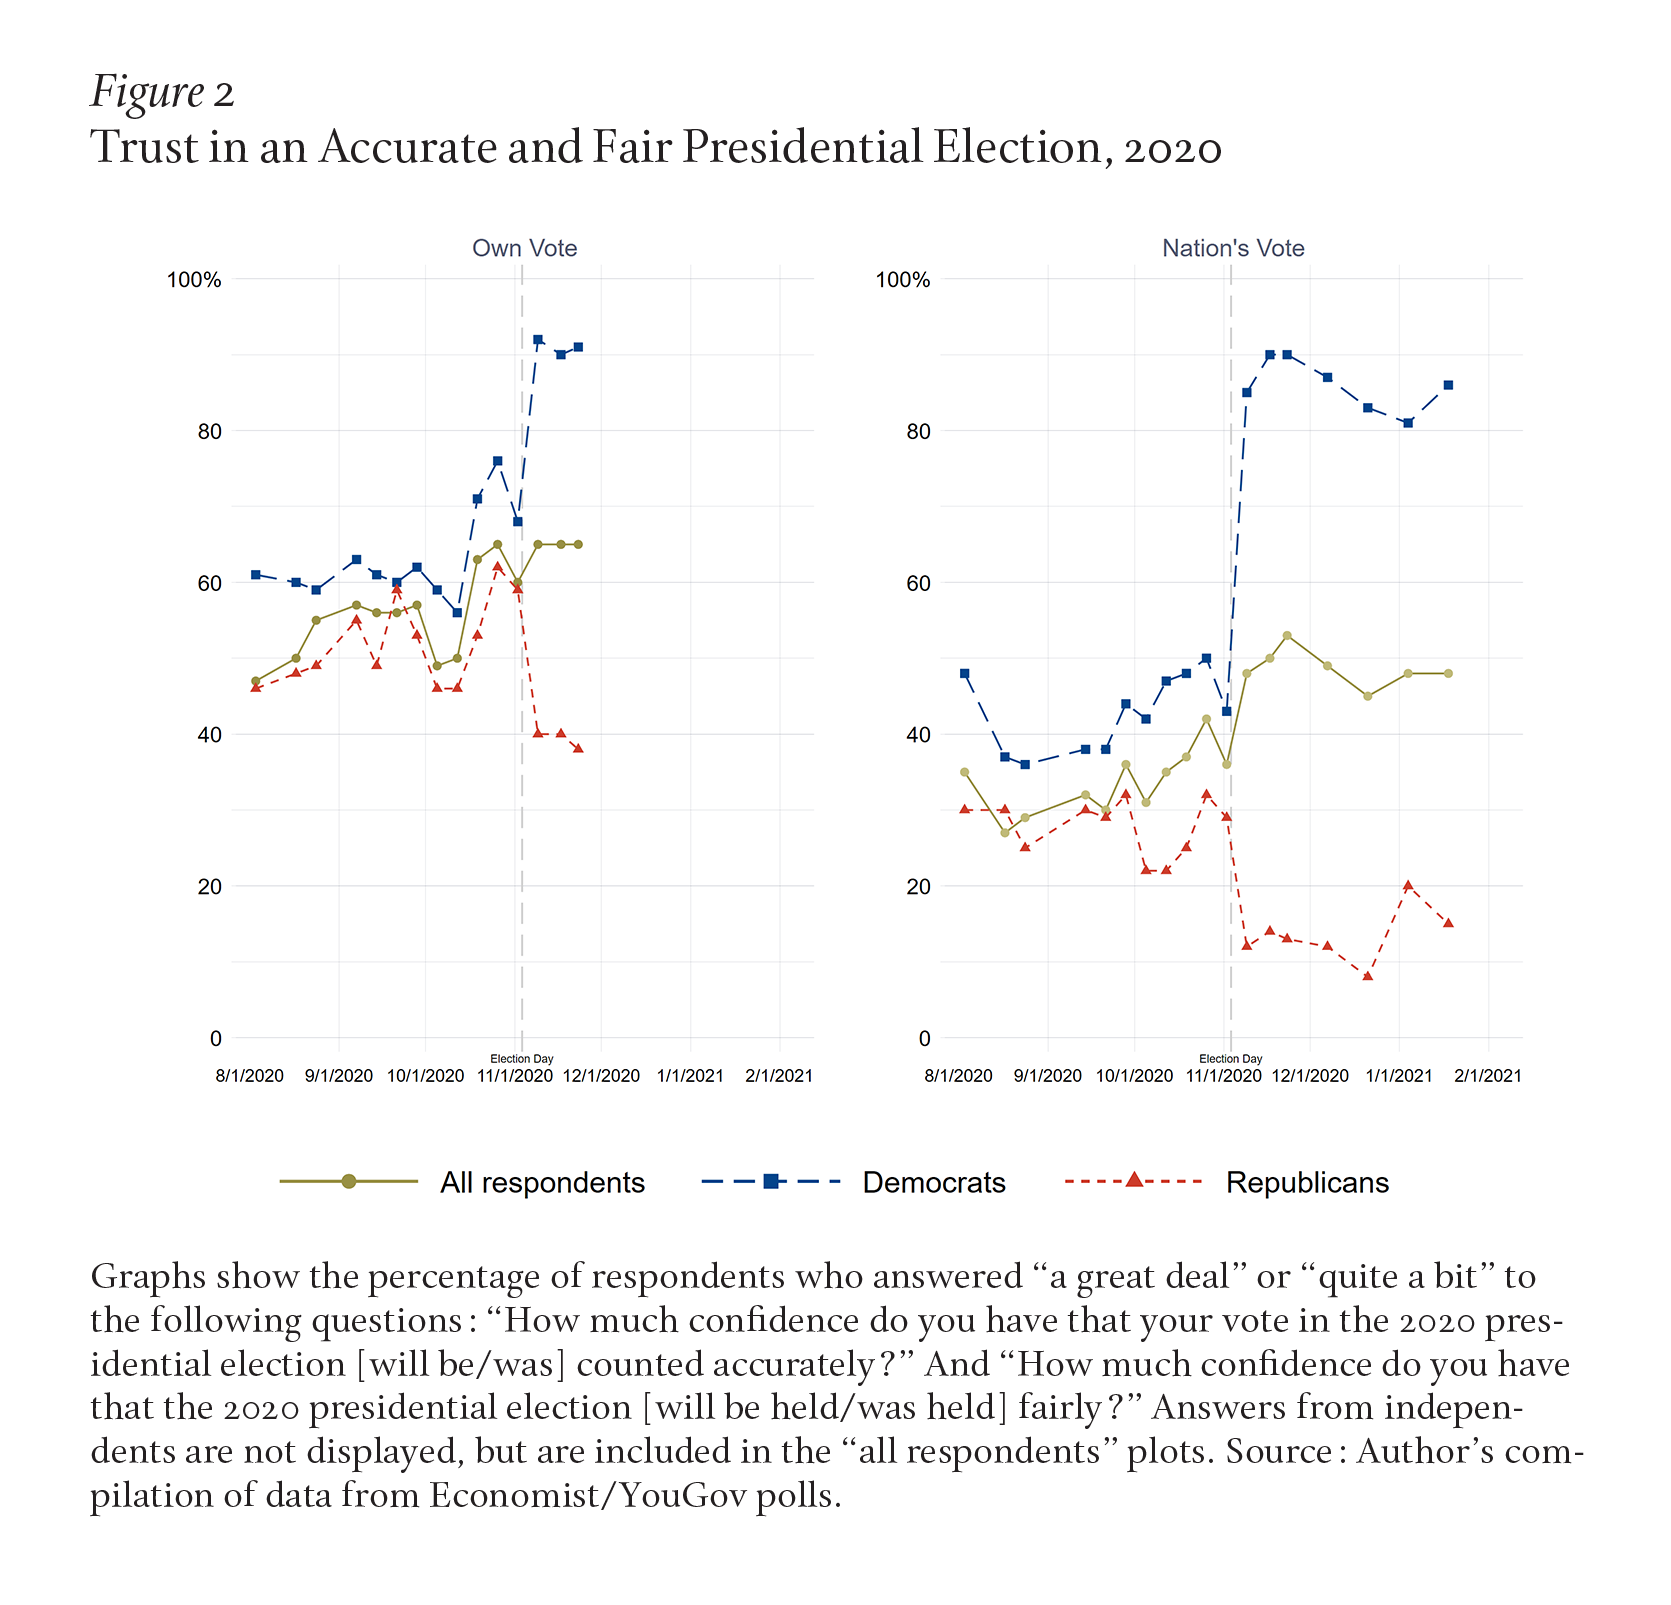 Figure 2 suggests that the outcome of the 2020 presidential election had a dramatic effect on one's confidence that votes were counted accurately. Before Election Day, an average 63 percent of Democrats expressed a great deal or quite a bit of confidence that their vote would be counted accurately in the election, compared with 52 percent of Republicans, for an 11-point gap. Within a day of the election, that gap grew to 45 points (93 percent for Democrats versus 48 percent for Republicans).